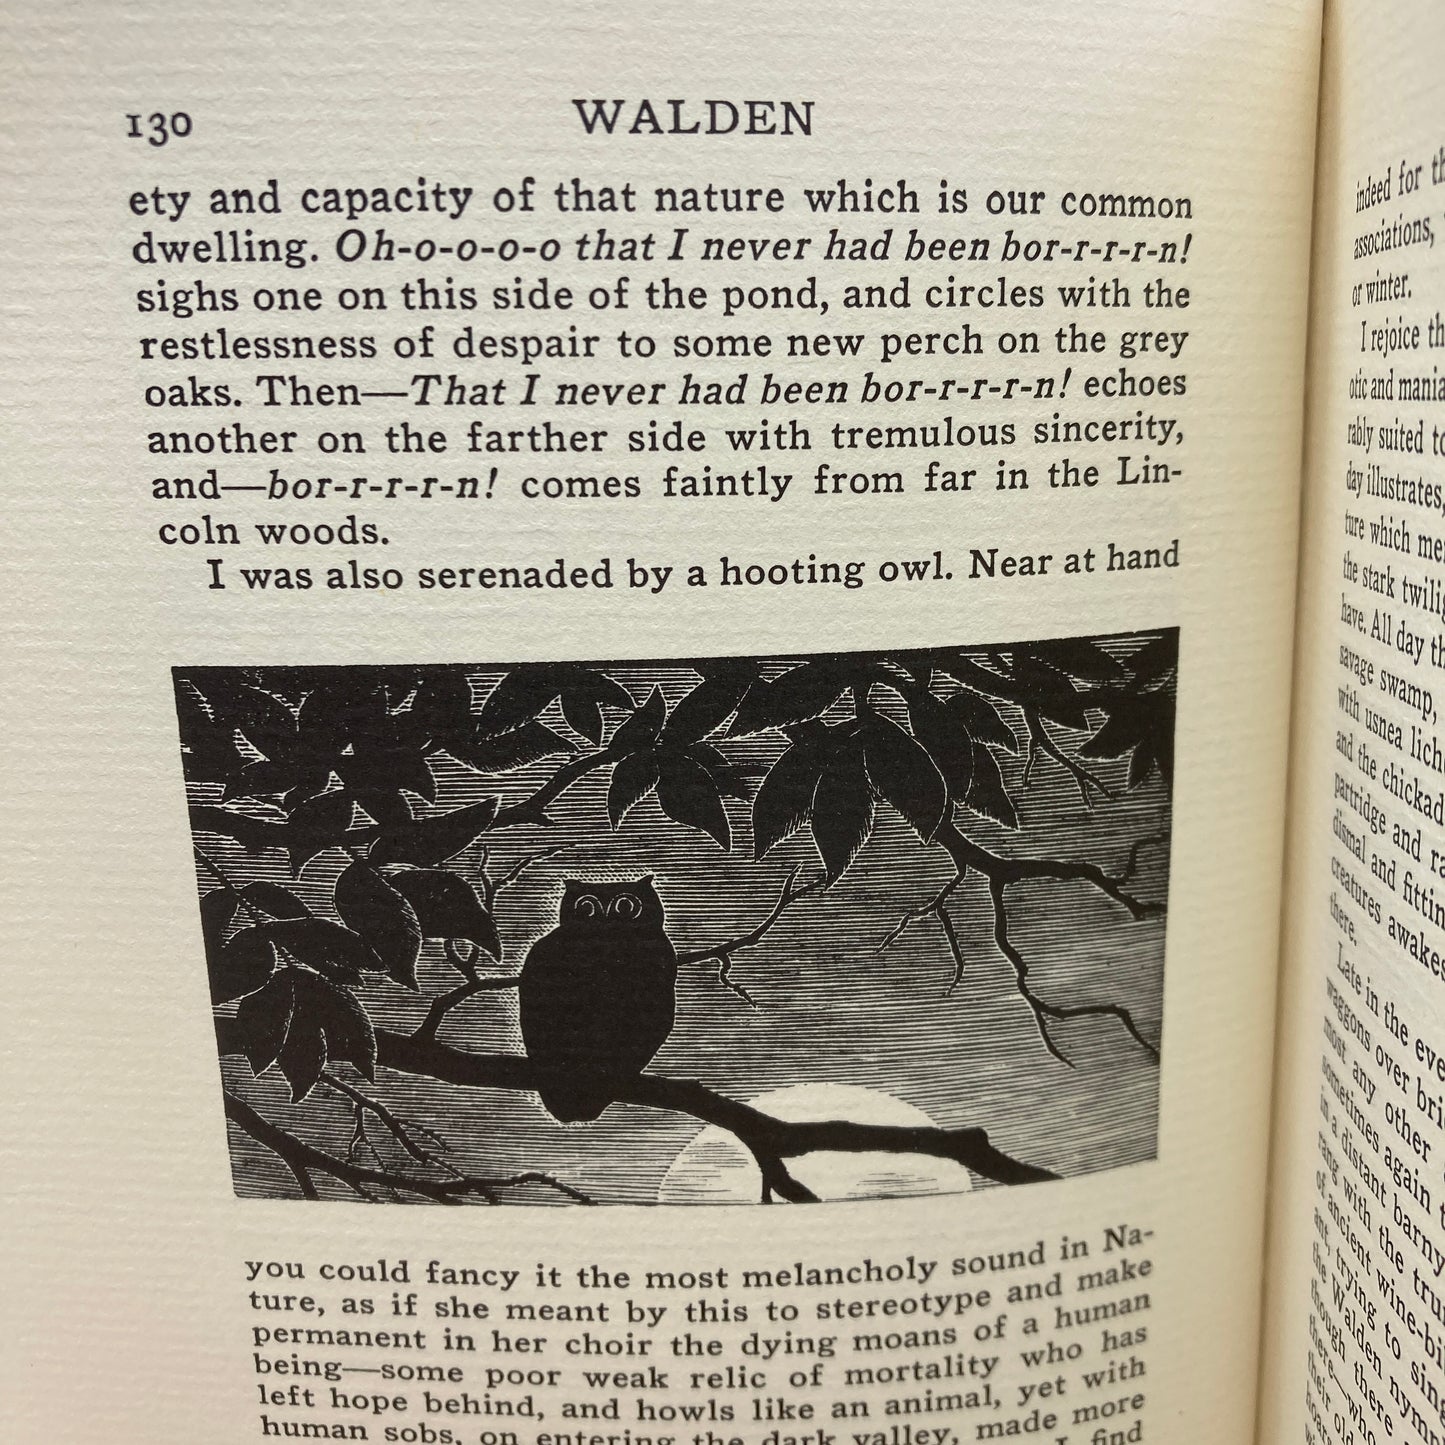 THOREAU, Henry David "Walden, or Life in the Woods" [Easton Press, 1981]